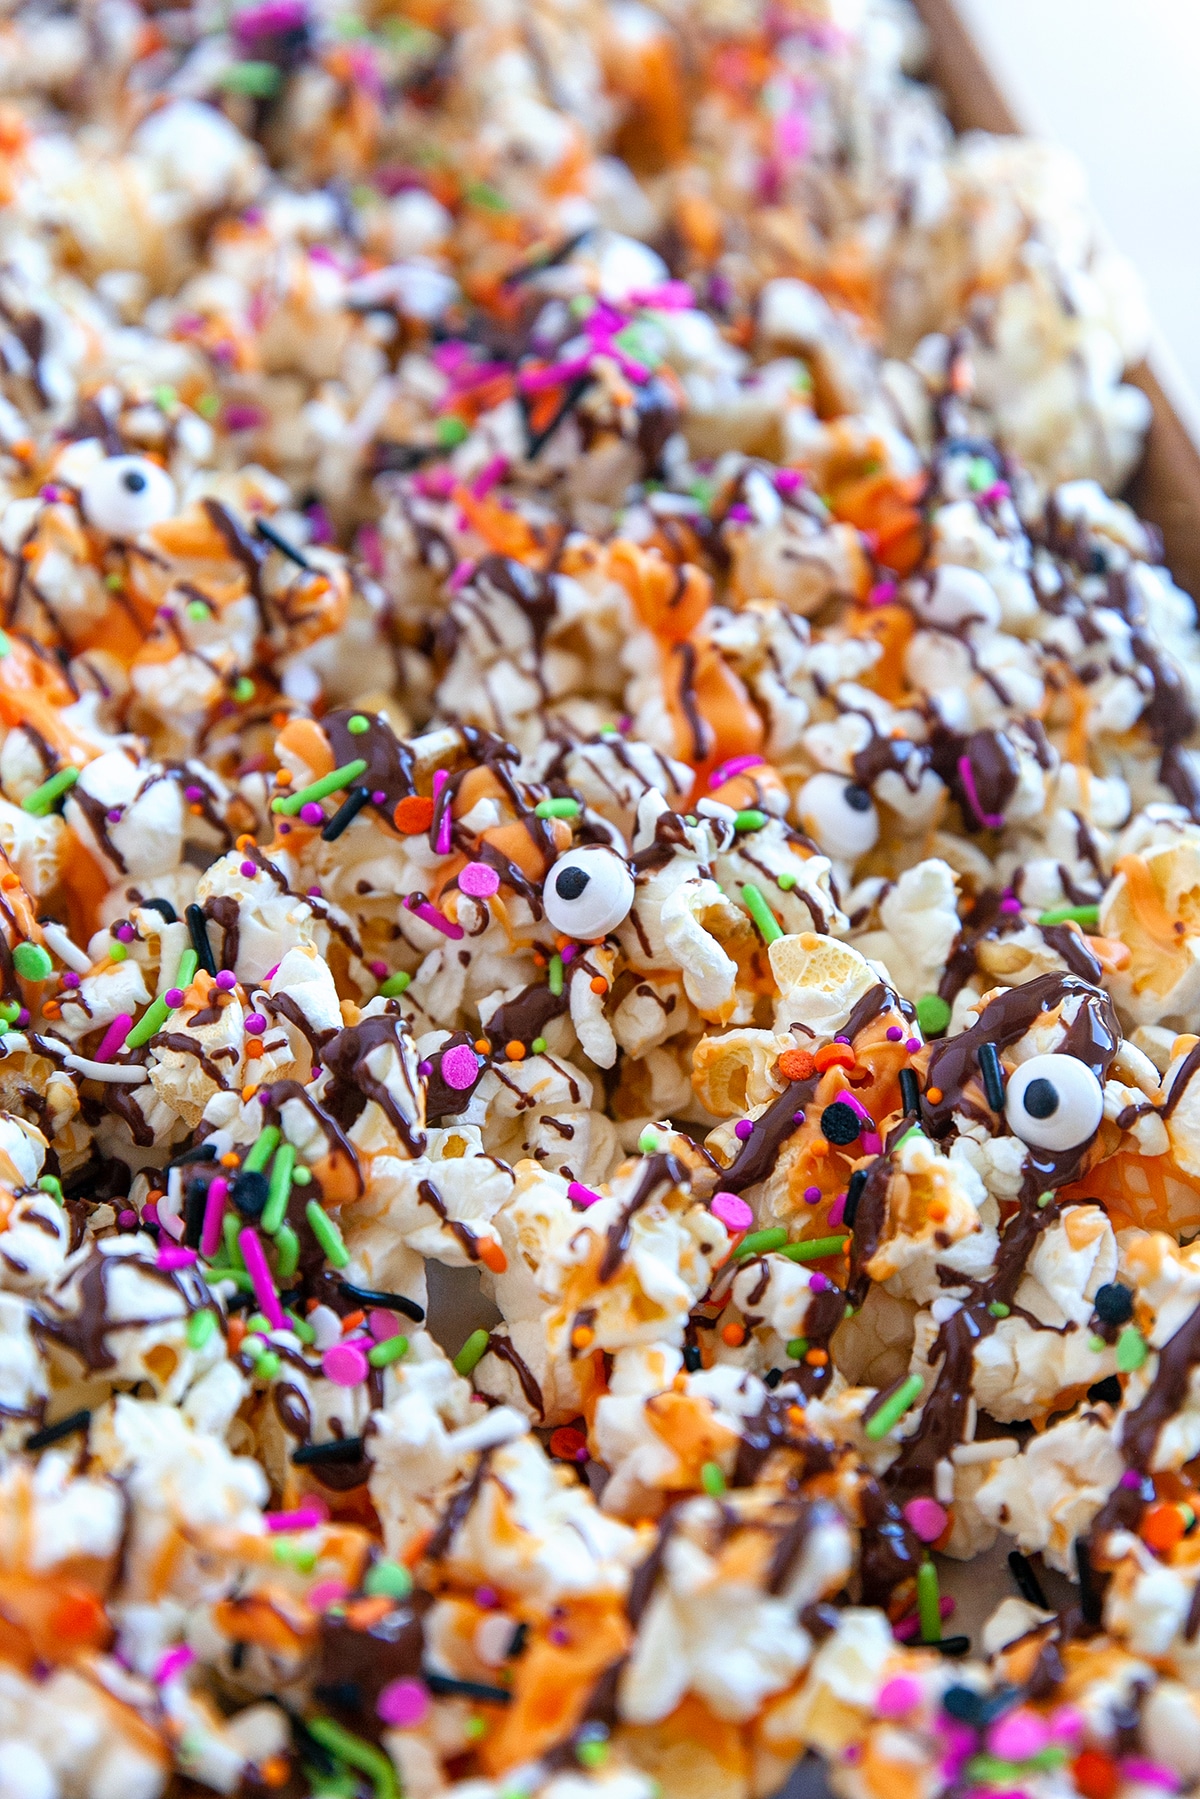 Halloween sprinkles added to the popcorn. 